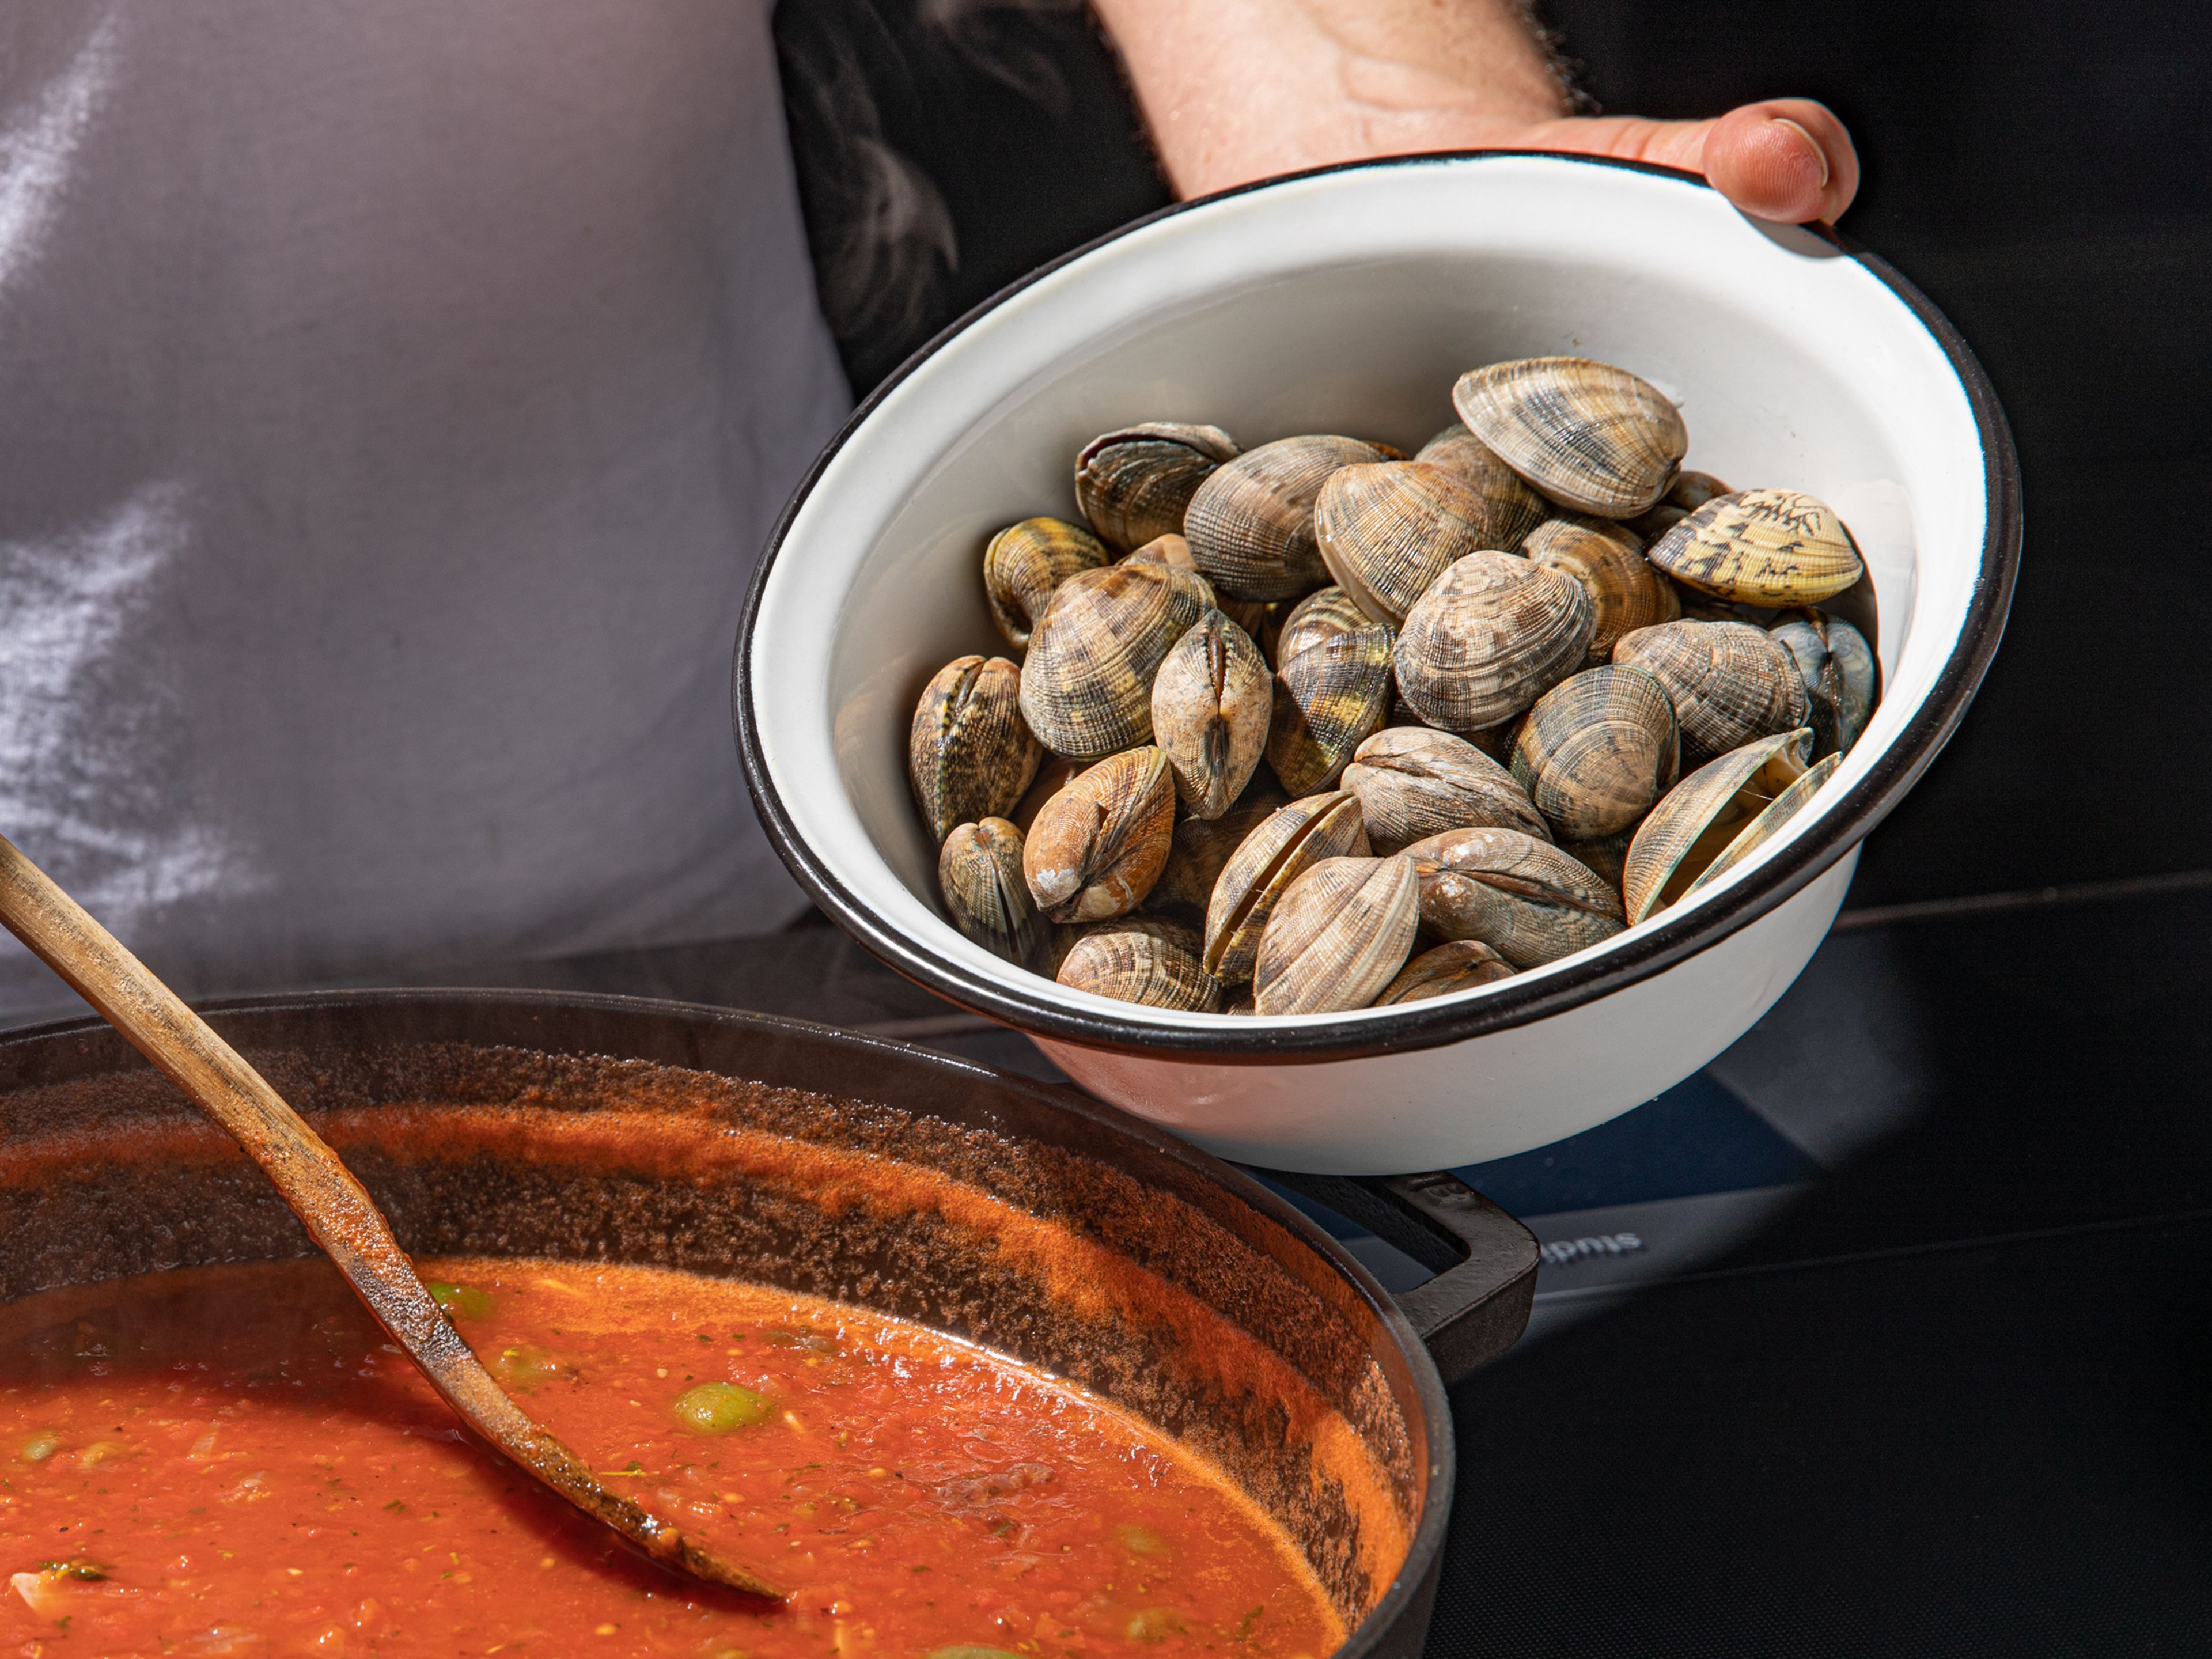 Add clams to the pot, cover, and continue to simmer for approx. 8 min. more. Add the octopus, swordfish, and chopped parsley to the sauce and cook for another 2 min. Serve with ciabatta. Enjoy!